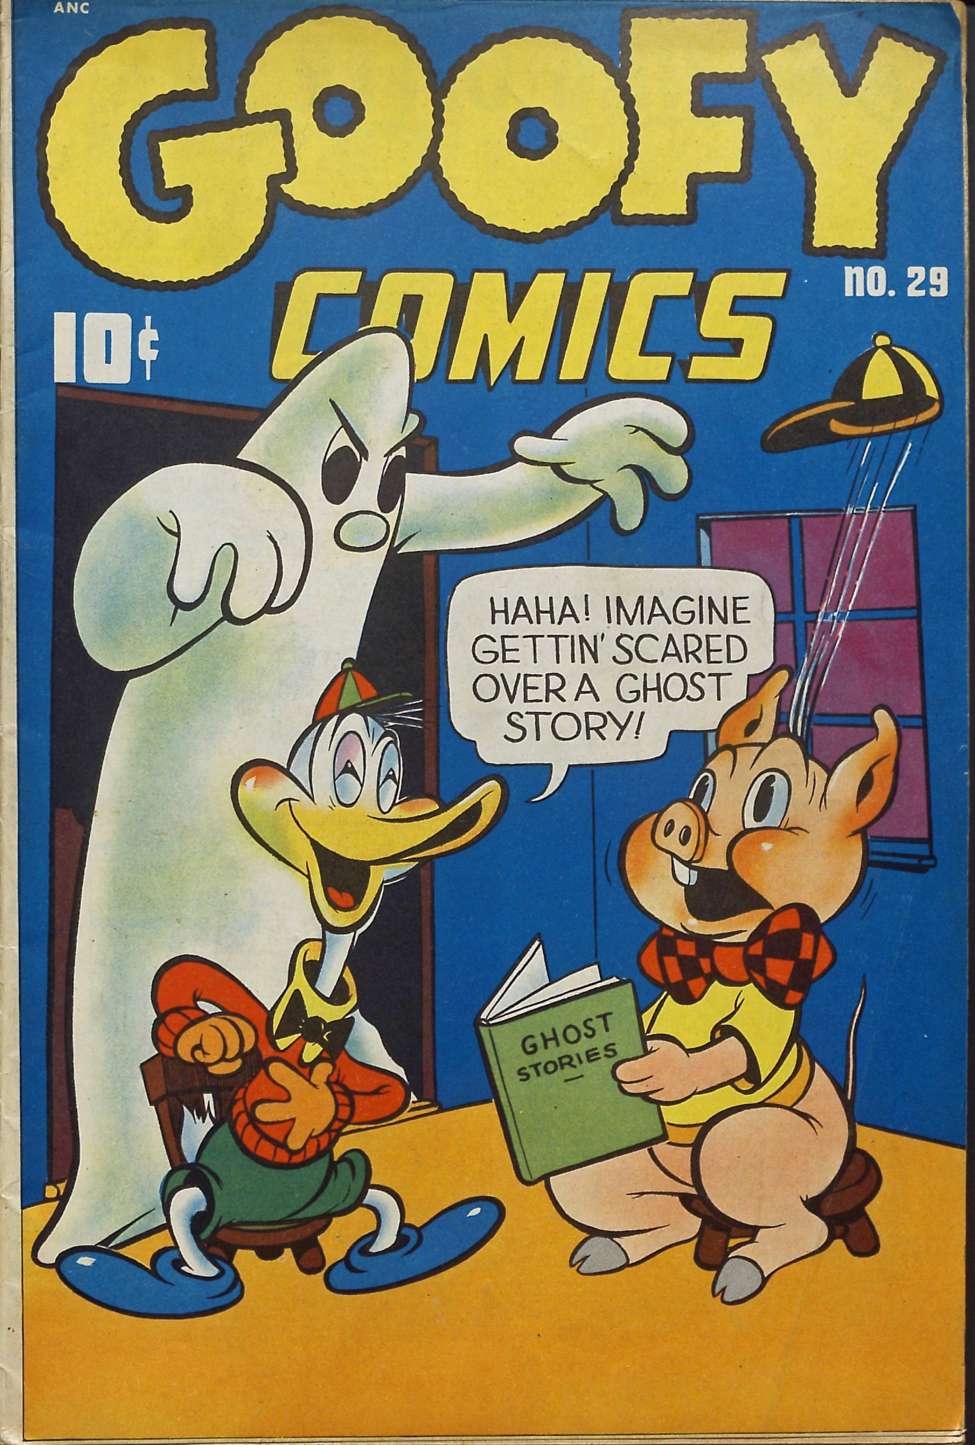 Book Cover For Goofy Comics 29